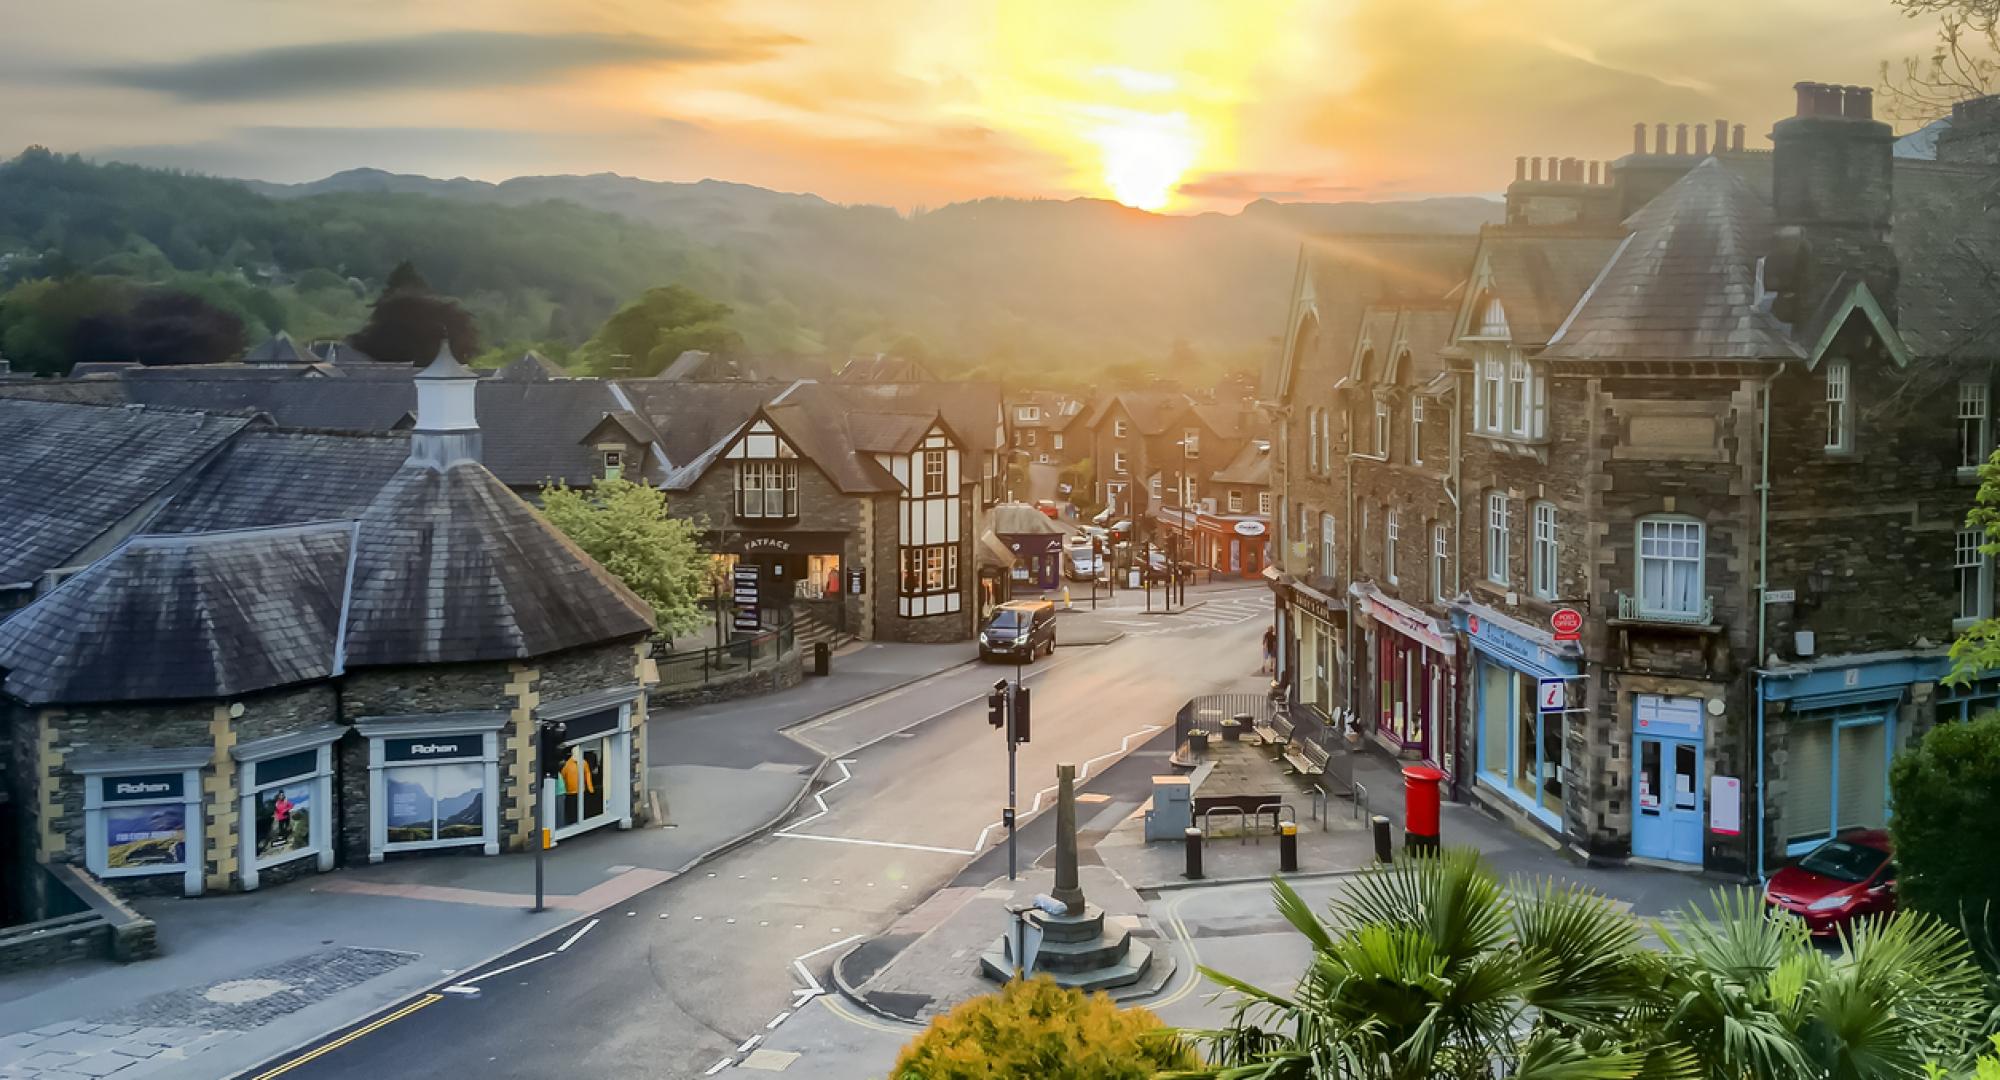 View across Ambleside in the Lake District, UK